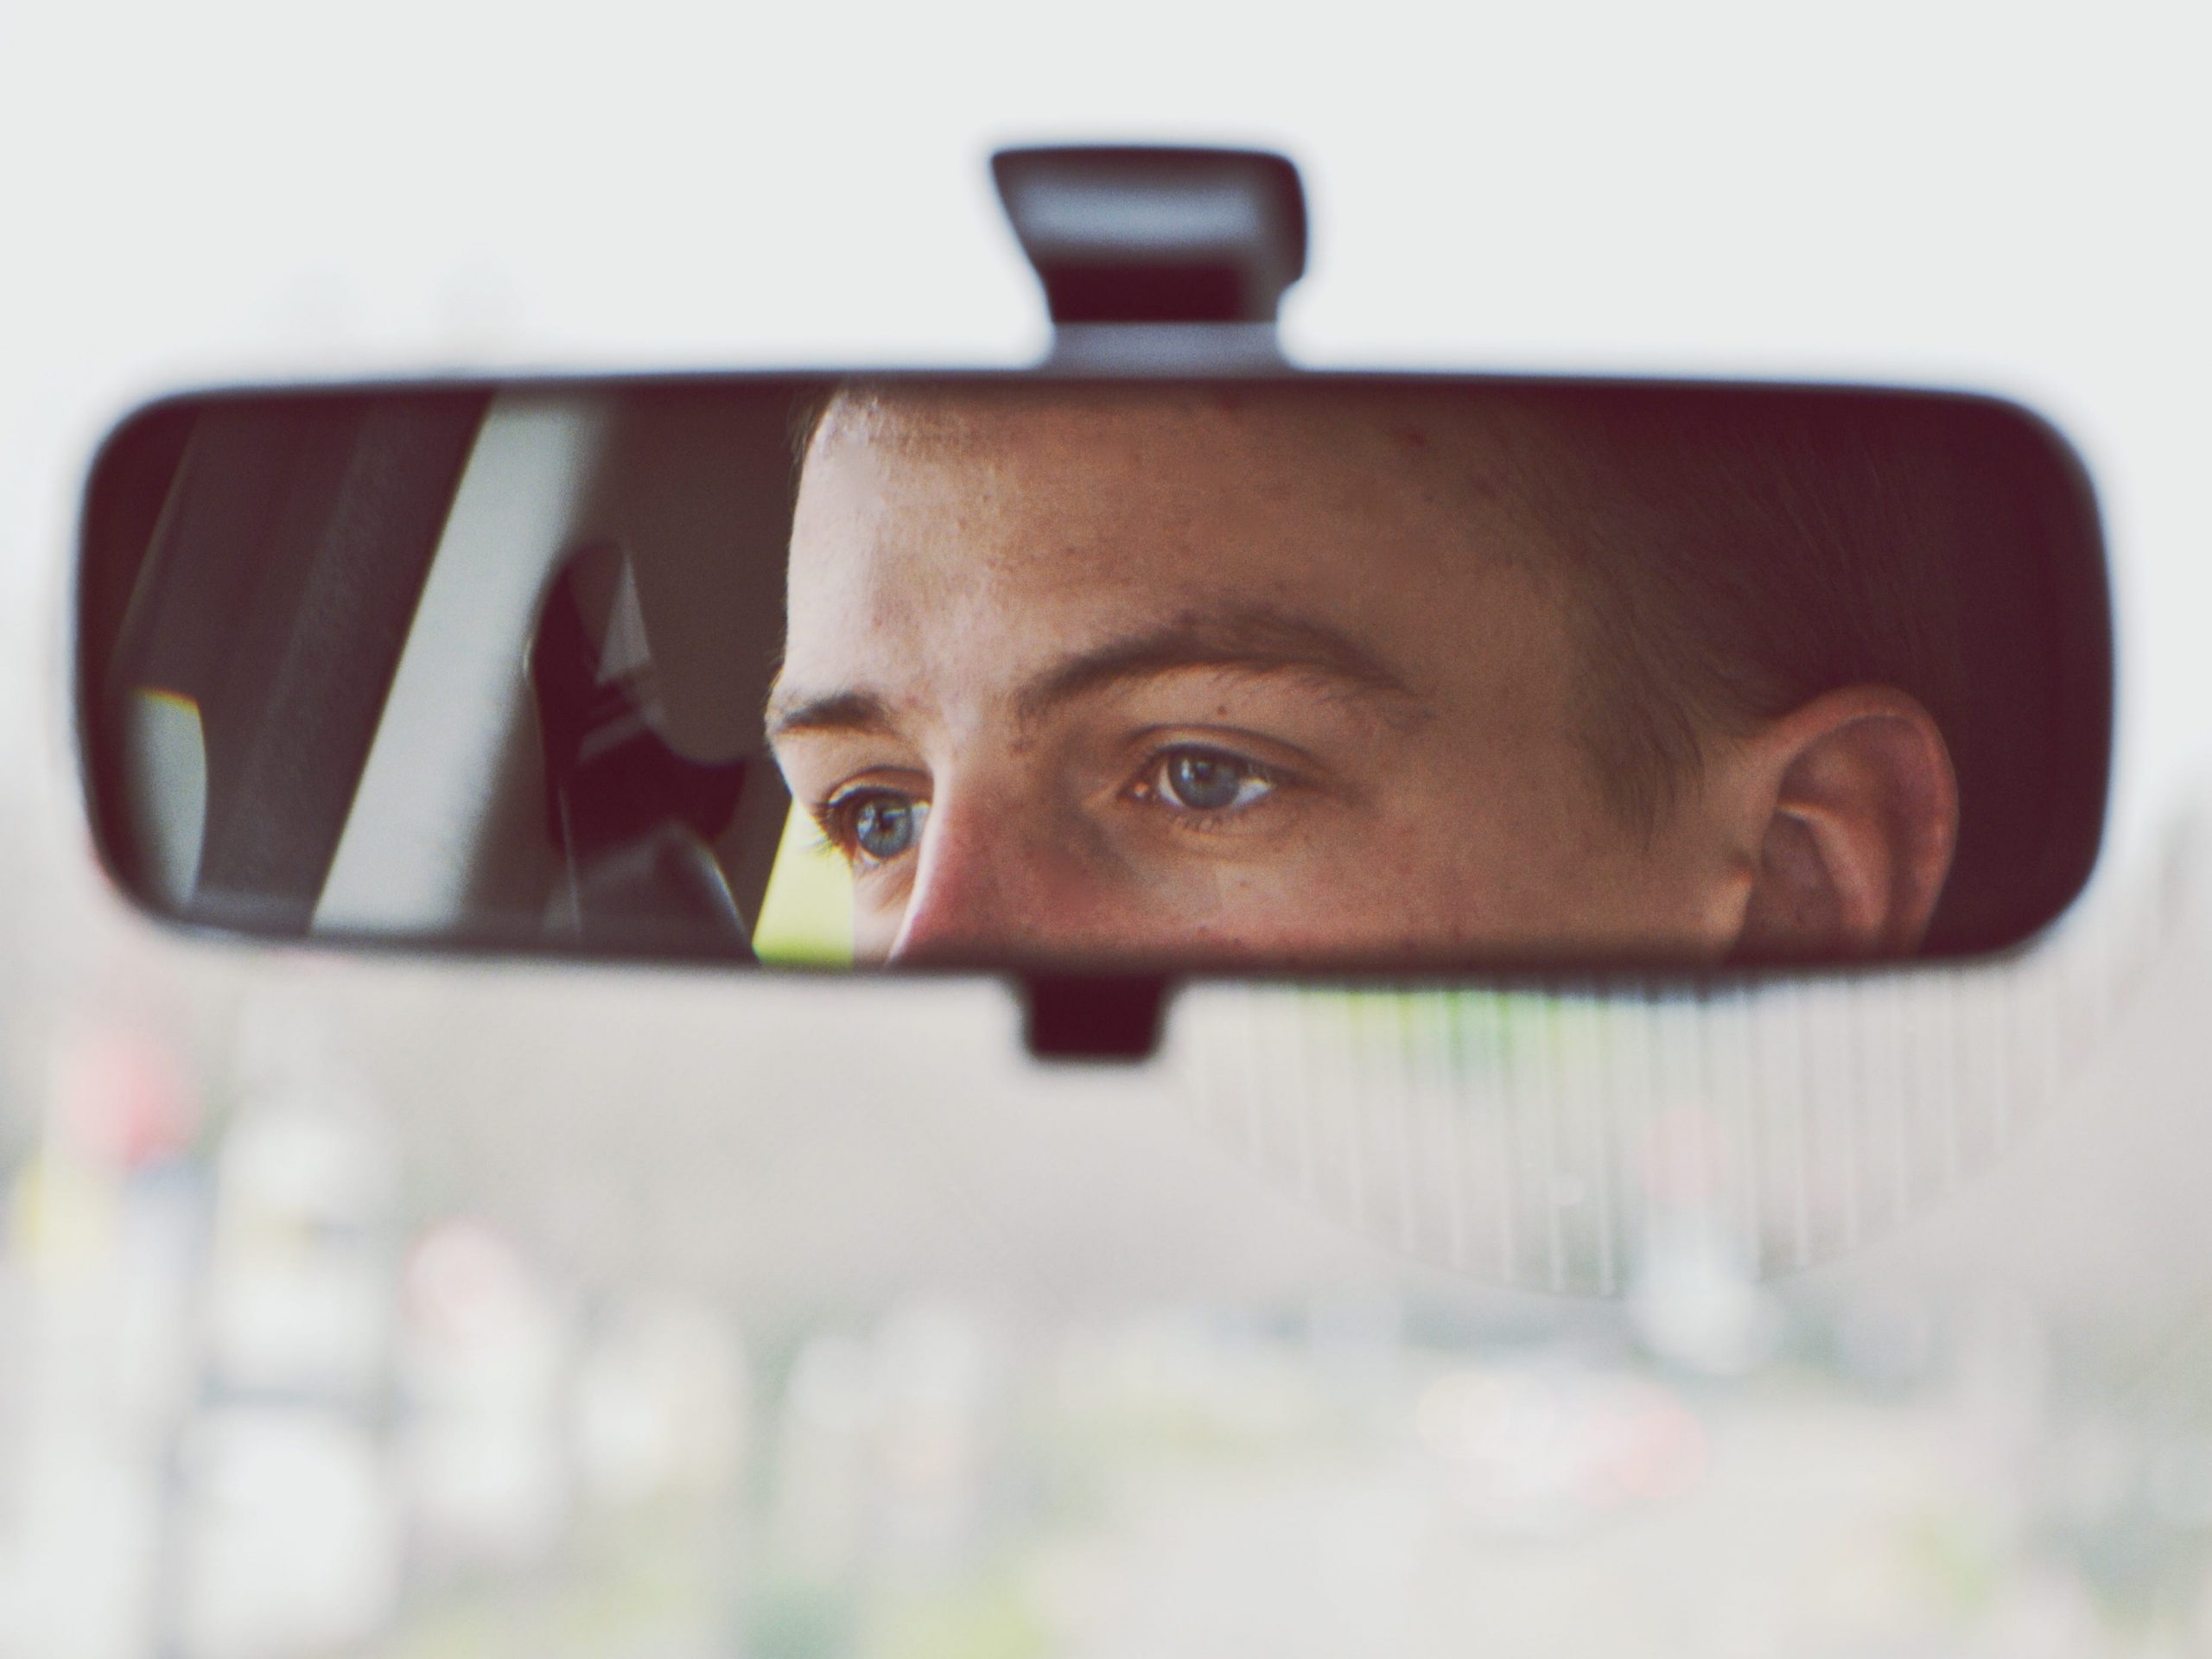 Reflection Of Man In Car On Rear-View Mirror